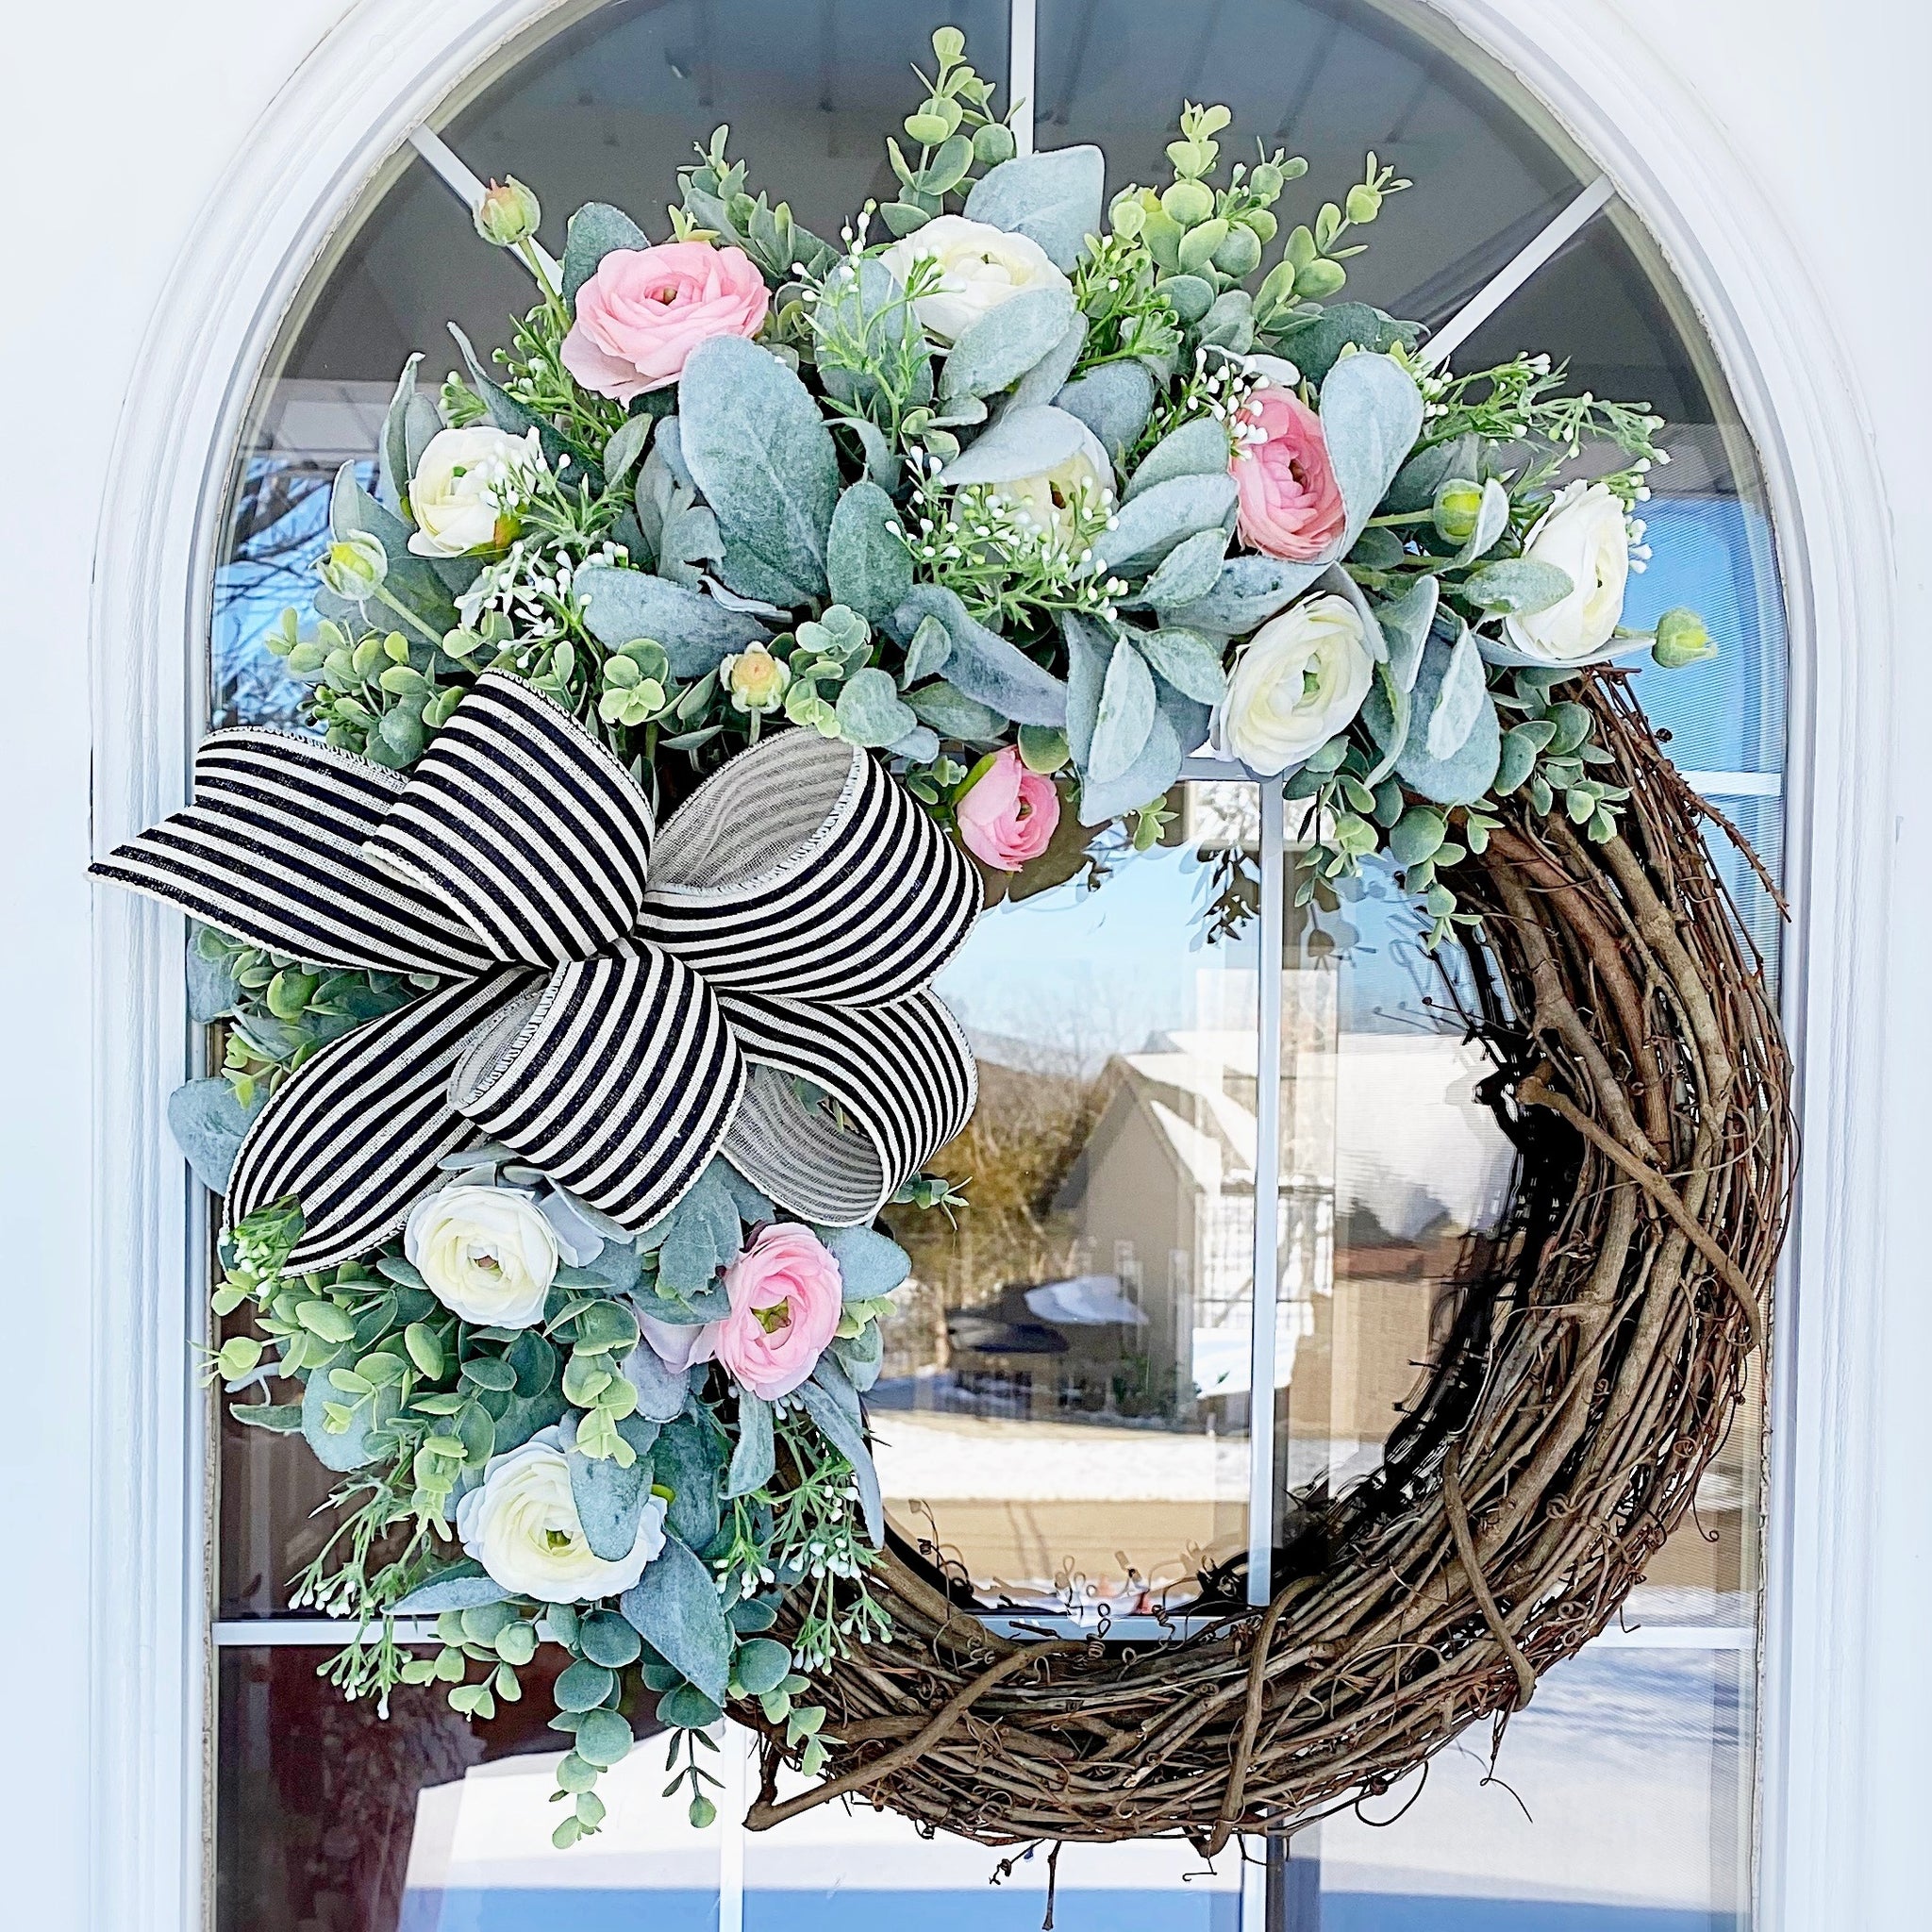 Spring Summer Wreath with Lambs Ear, Eucalyptus, White and Pink Ranunculus Flowers Welcome Front Door